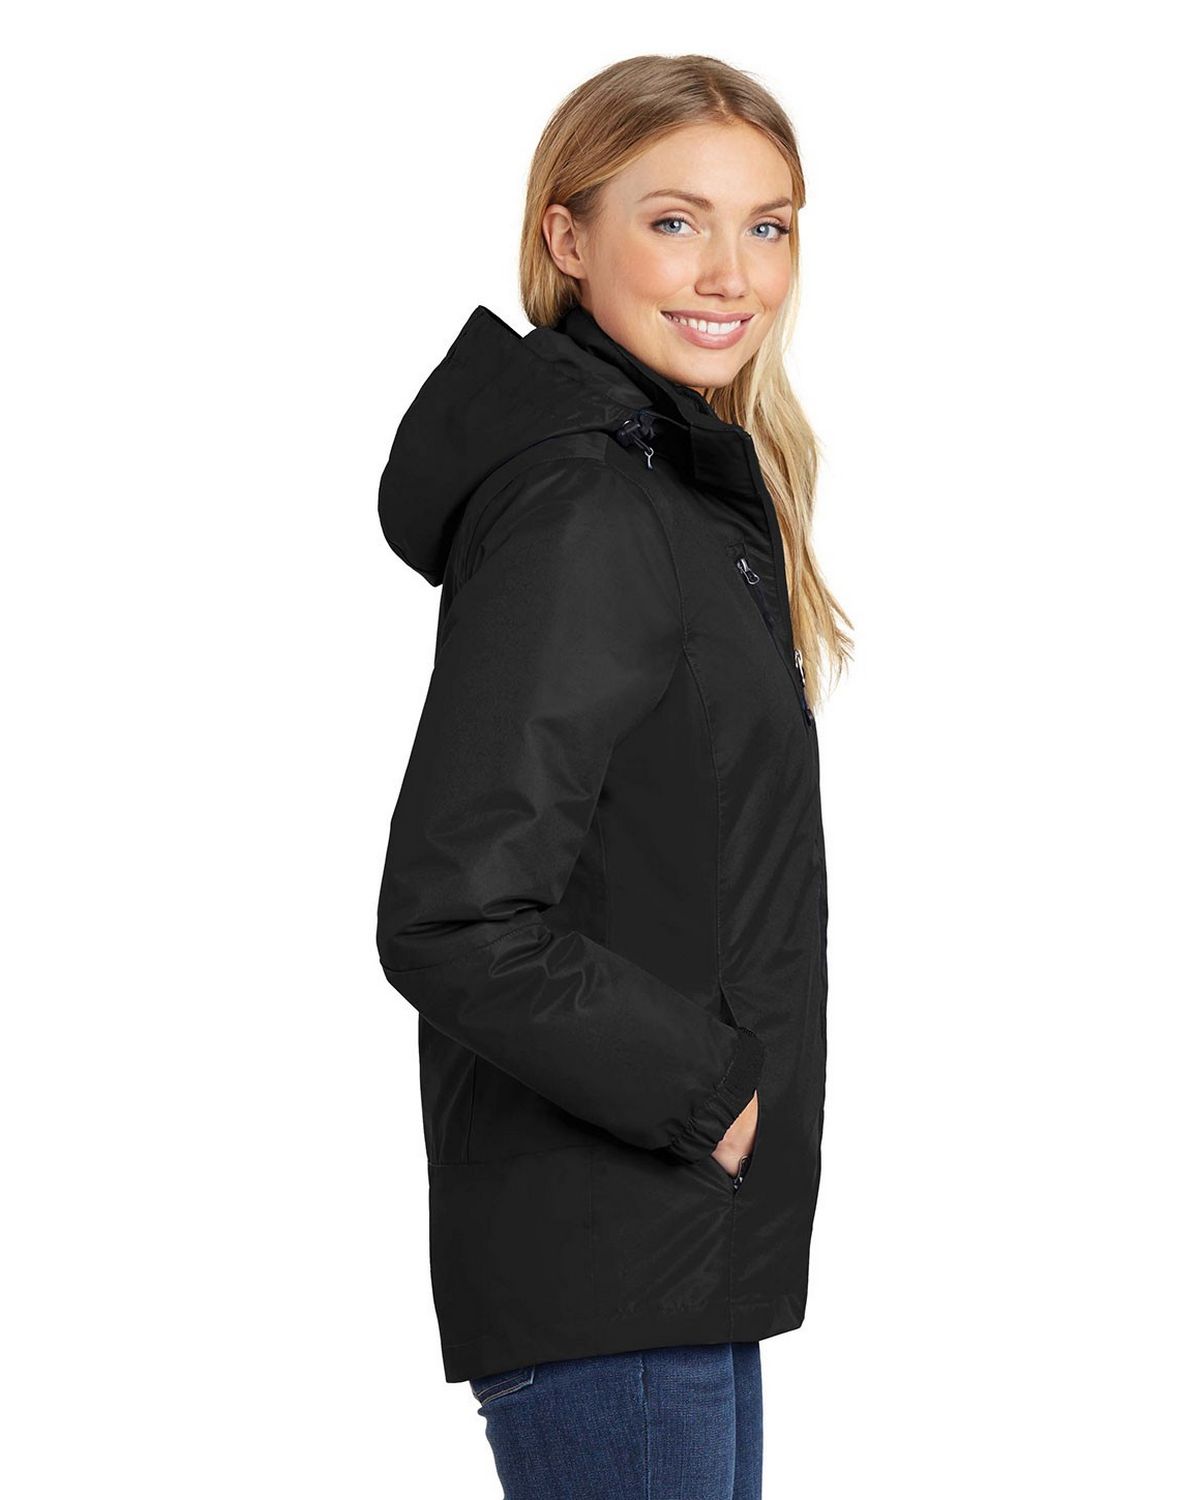 Size Chart for Port Authority L332 Ladies Vortex Waterproof 3-in-1 Jacket